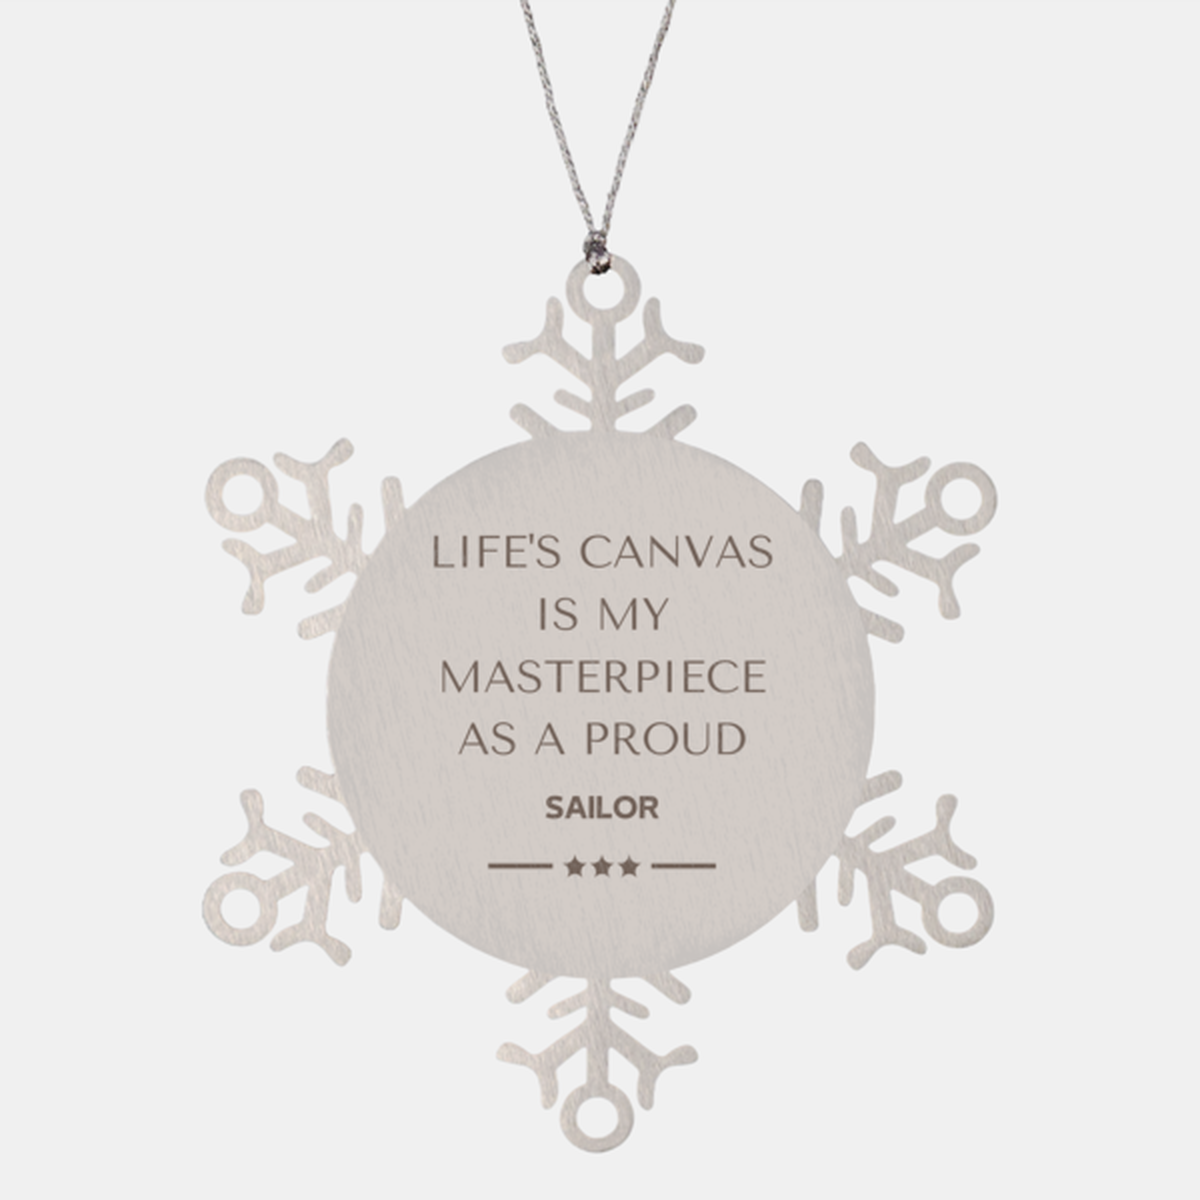 Proud Sailor Gifts, Life's canvas is my masterpiece, Epic Birthday Christmas Unique Snowflake Ornament For Sailor, Coworkers, Men, Women, Friends